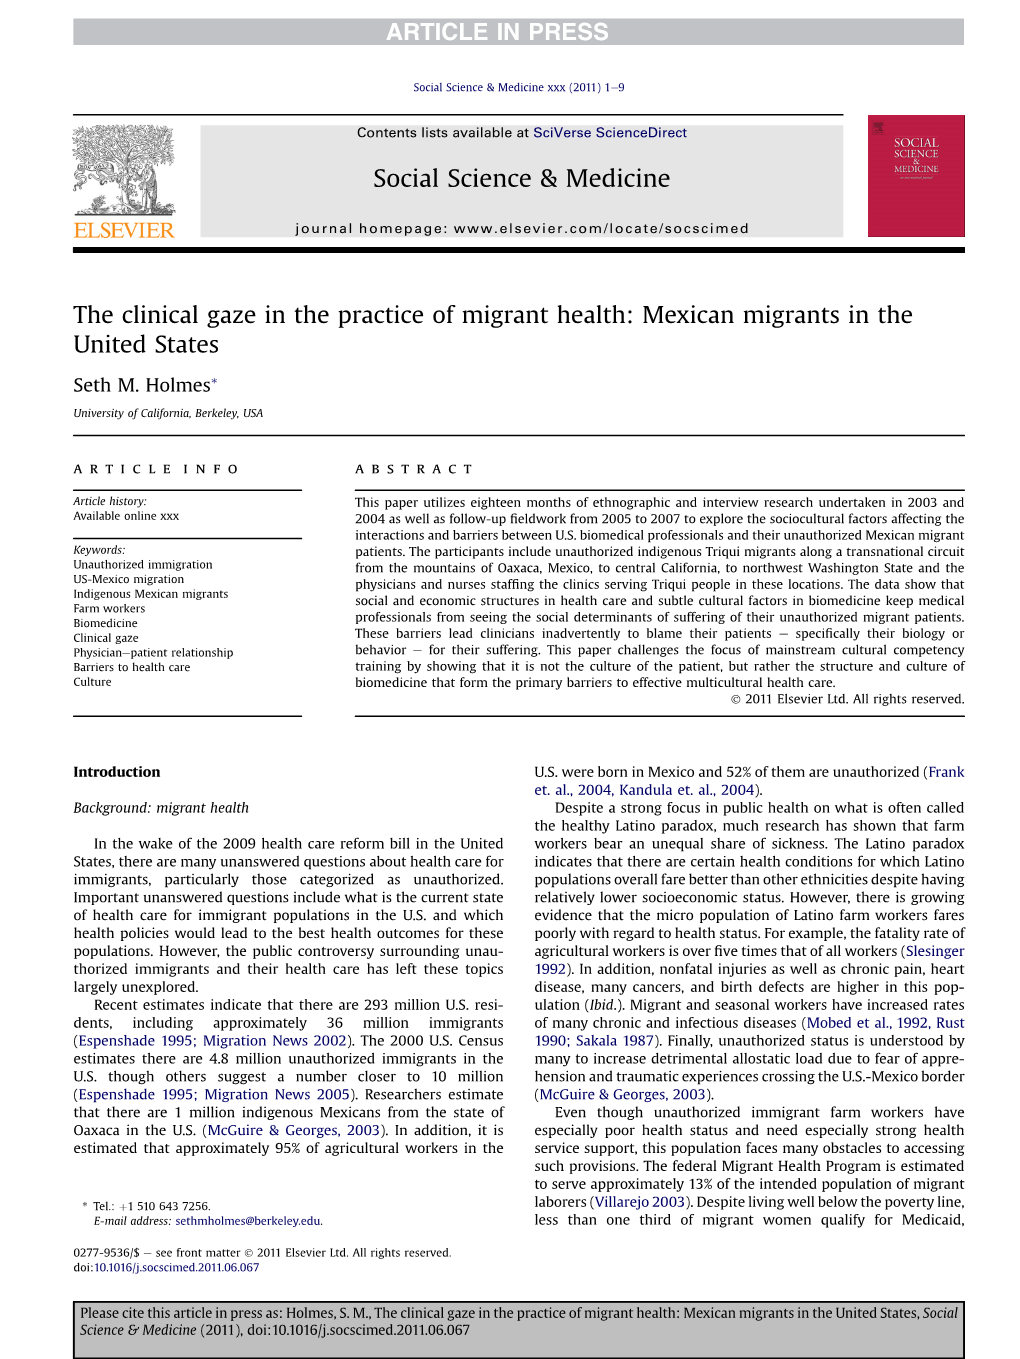 The Clinical Gaze in the Practice of Migrant Health: Mexican Migrants in the United States